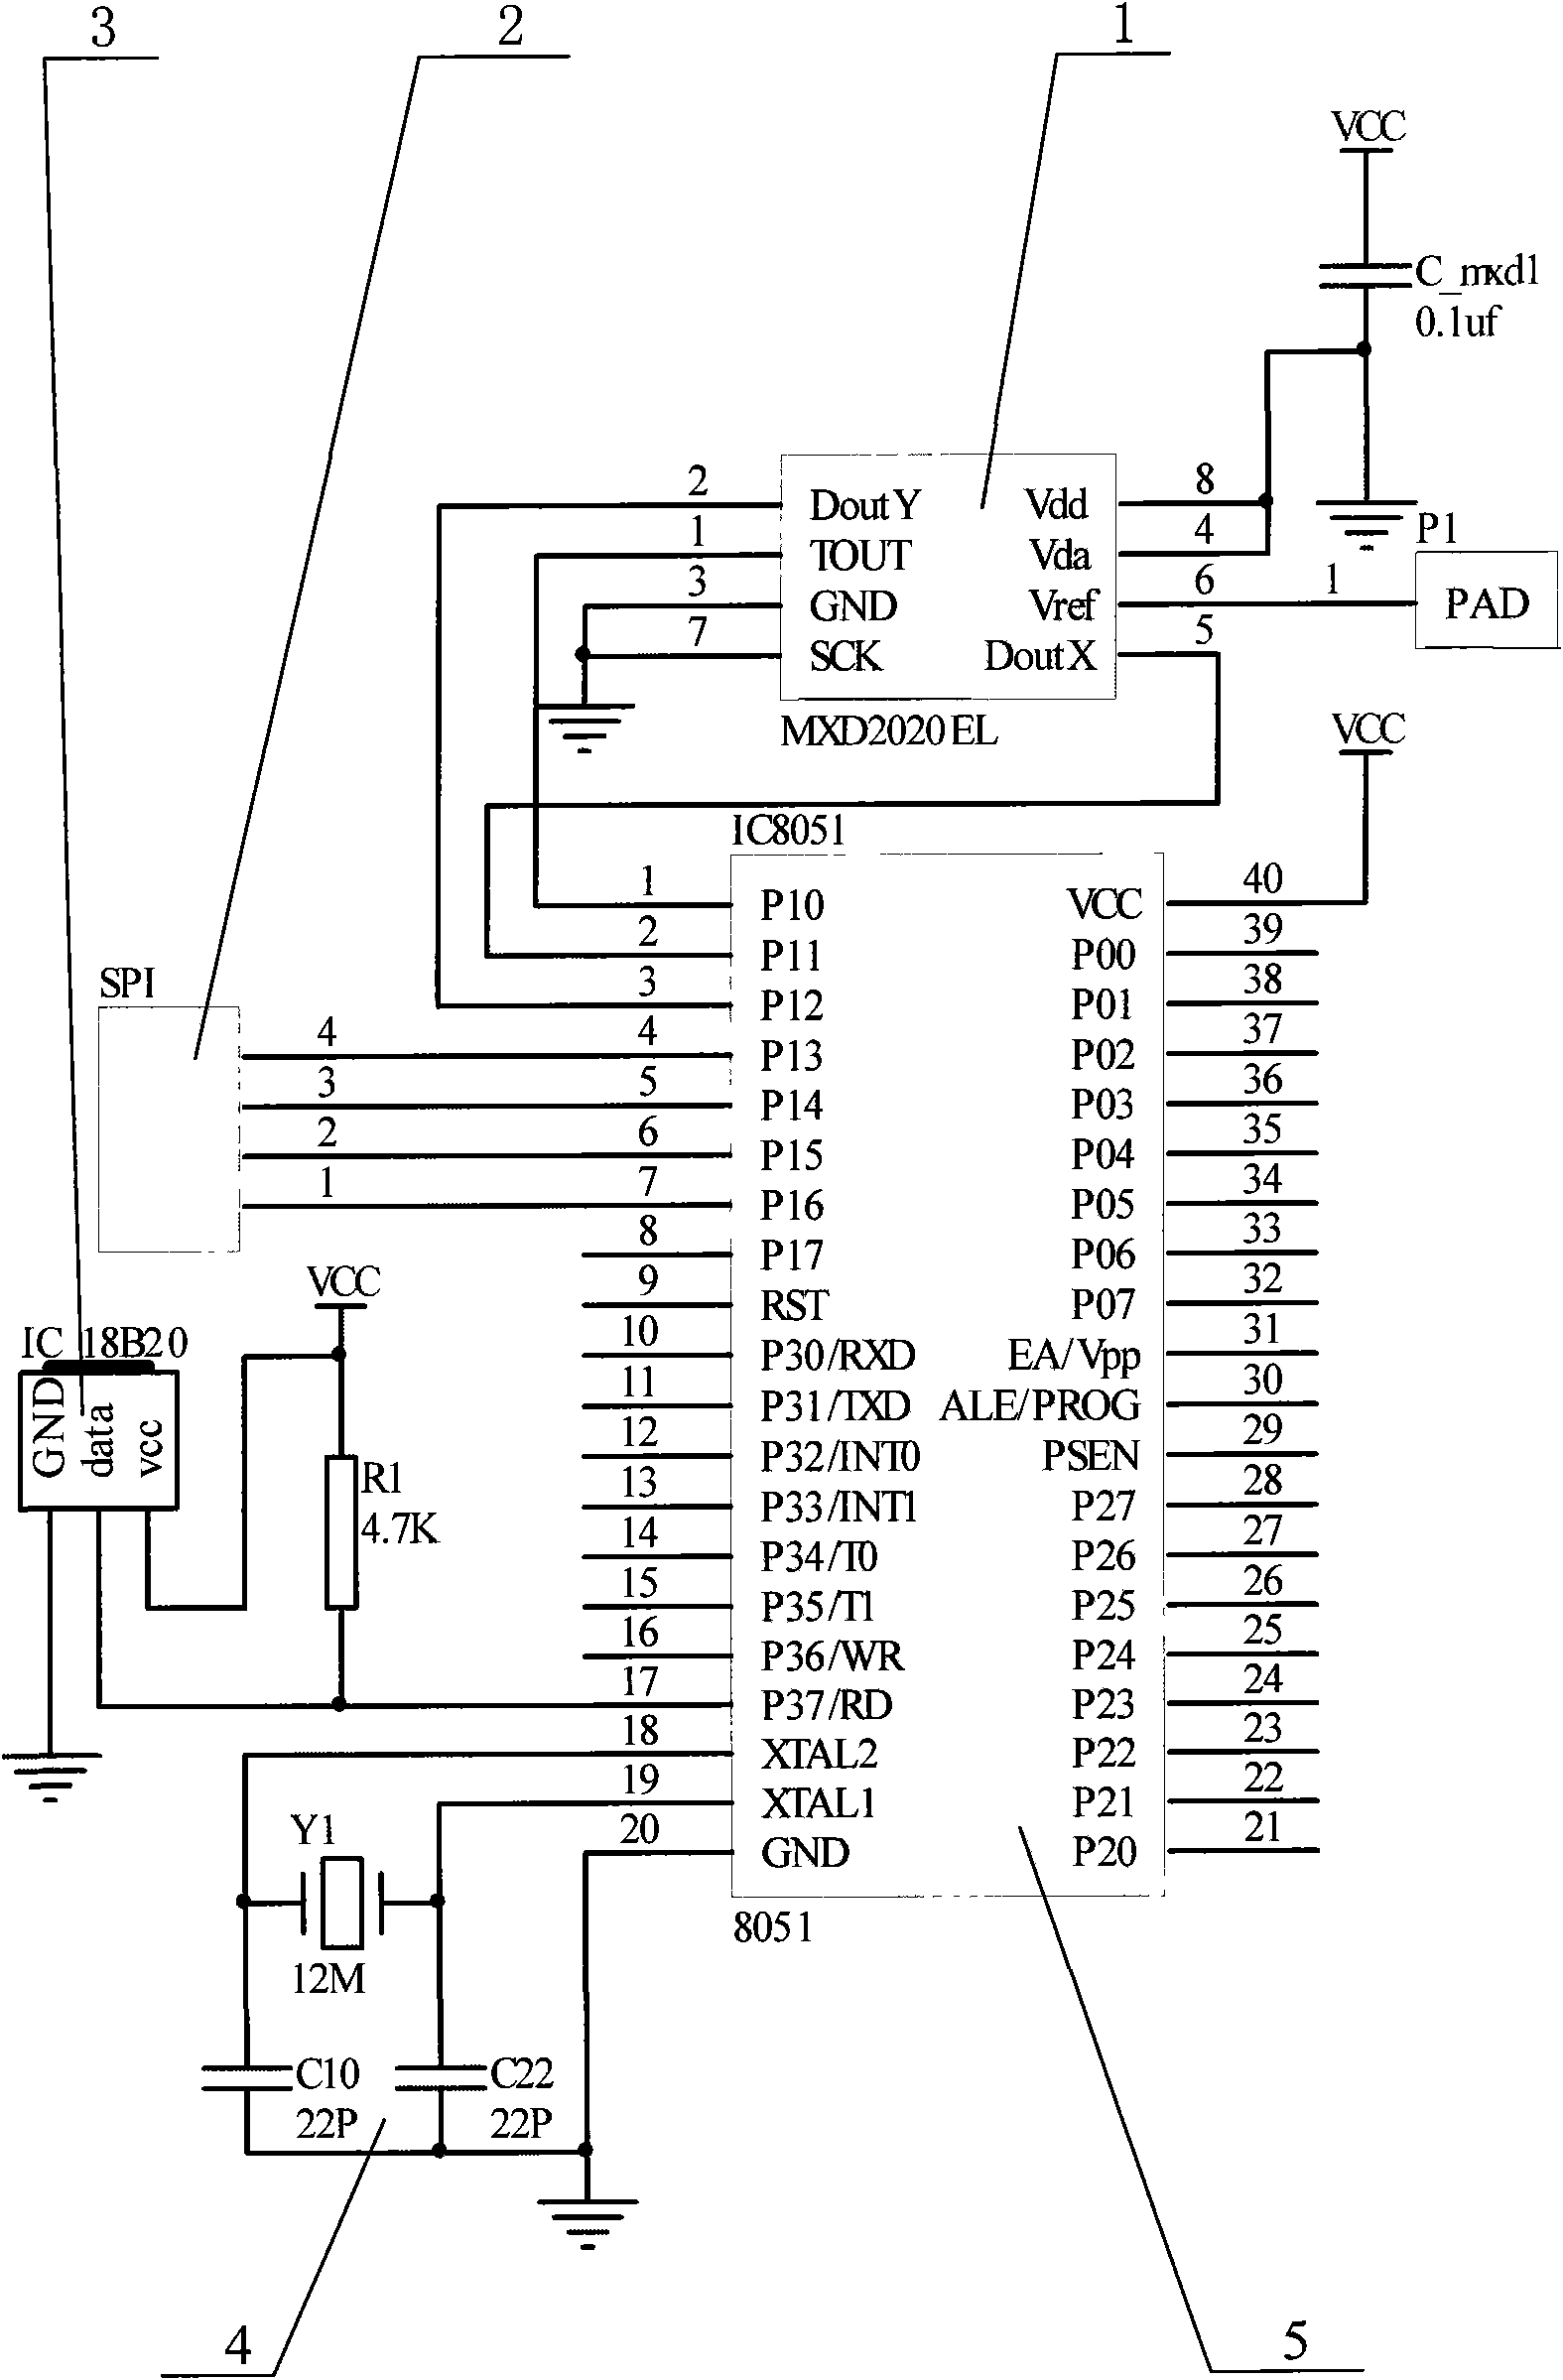 Intelligent device for detecting on-vehicle roll-over and remotely asking for help